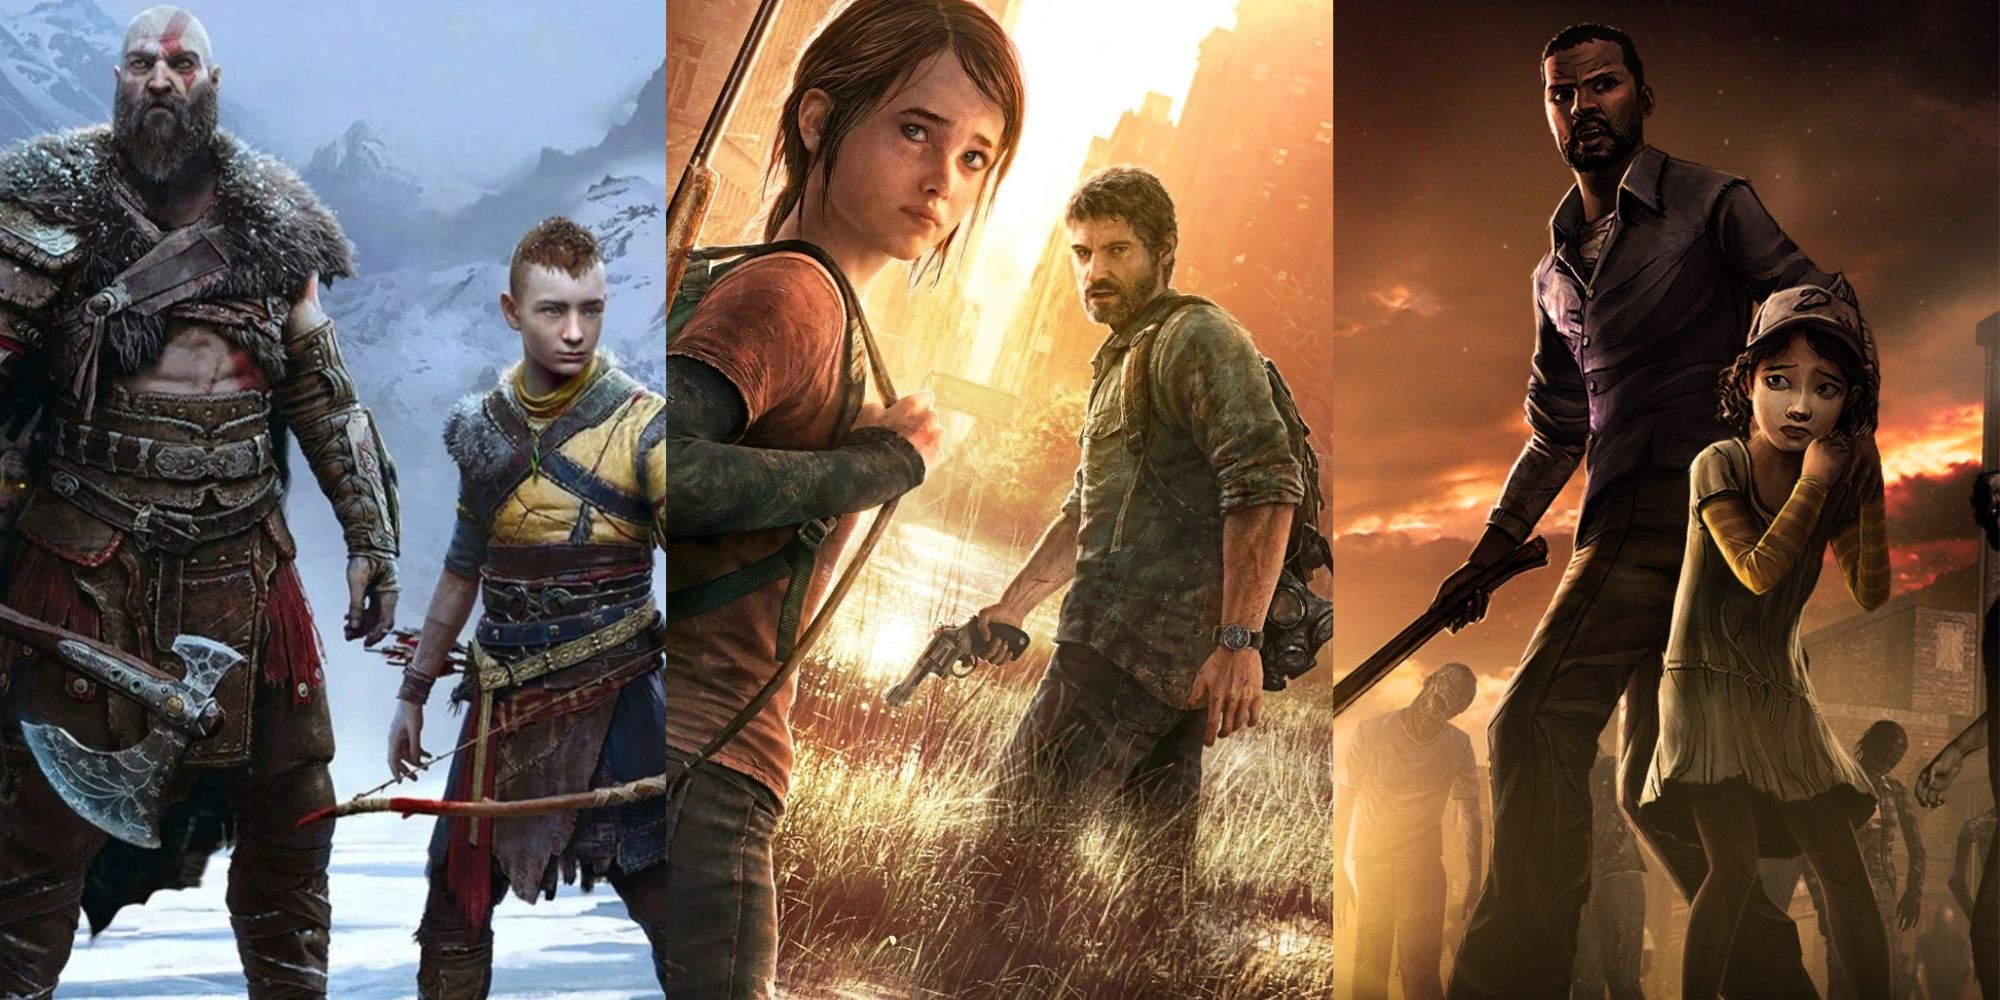 10 games like The Last of Us that will take you on an unforgettable  adventure